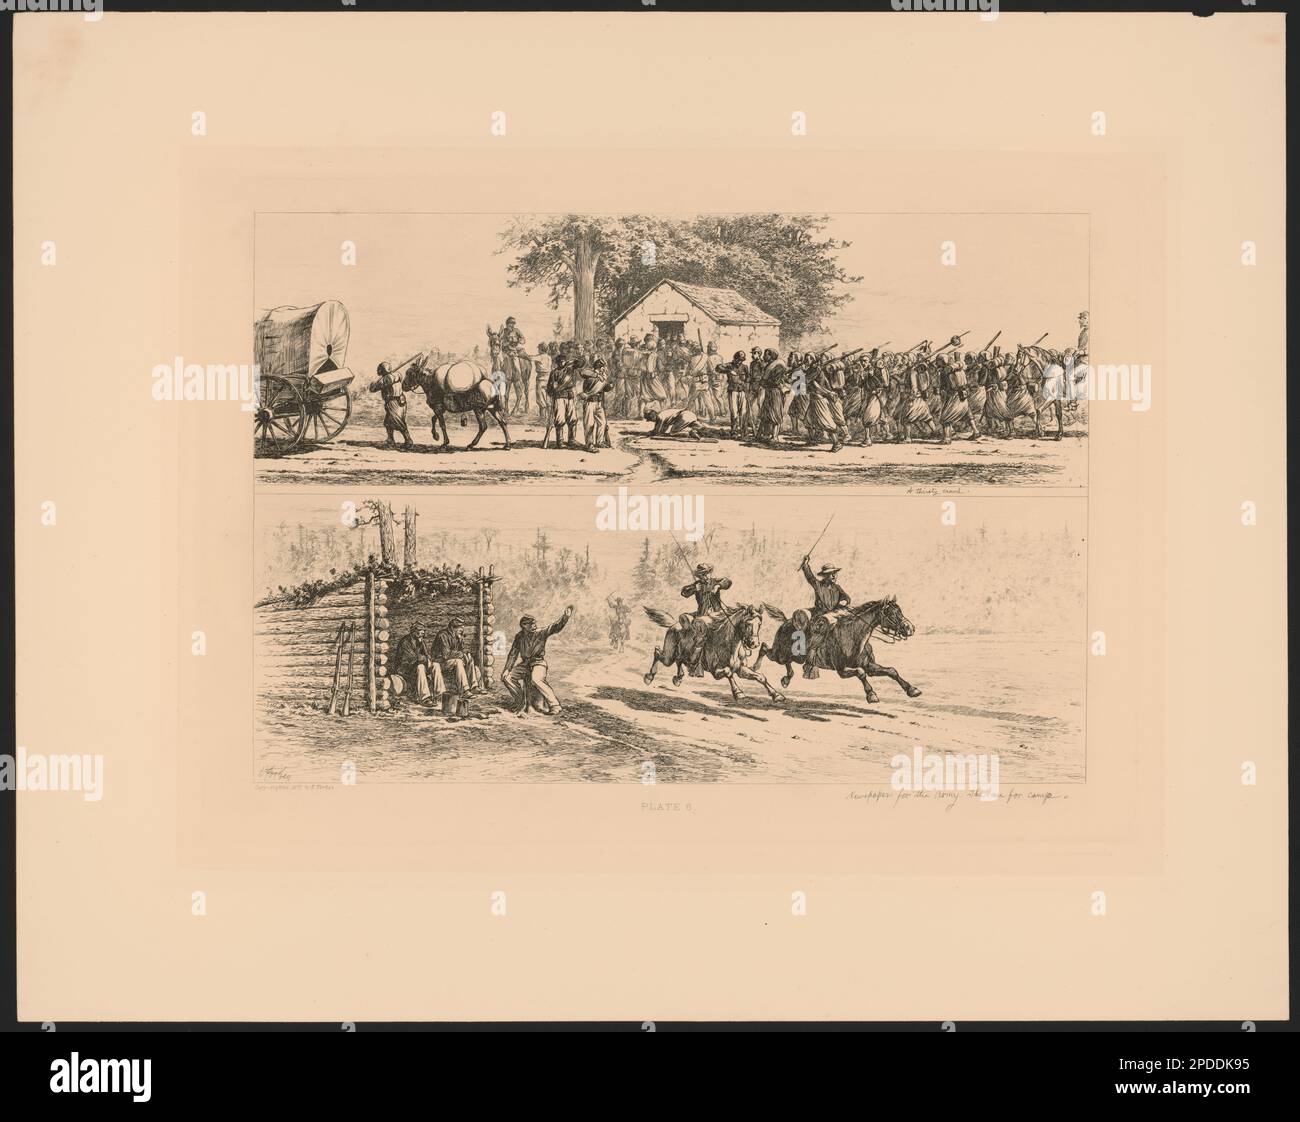 A thirsty crowd Newspapers for the Army. The race for camp / / E. Forbes.. Popular graphic art print filing series , FGardiner Greene Hubbard collection . Springhouses, 1860-1870, Zouaves, 1860-1870, Soldiers, Union, 1860-1870, Troop movements, Union, 1860-1870, Newspapers, 1860-1870, Horseback riding, 1860-1870, Log buildings, 1860-1870, United States, History, Civil War, 1861-1865, Military personnel, Union, United States, History, Civil War, 1861-1865, Communications, Union. Stock Photo